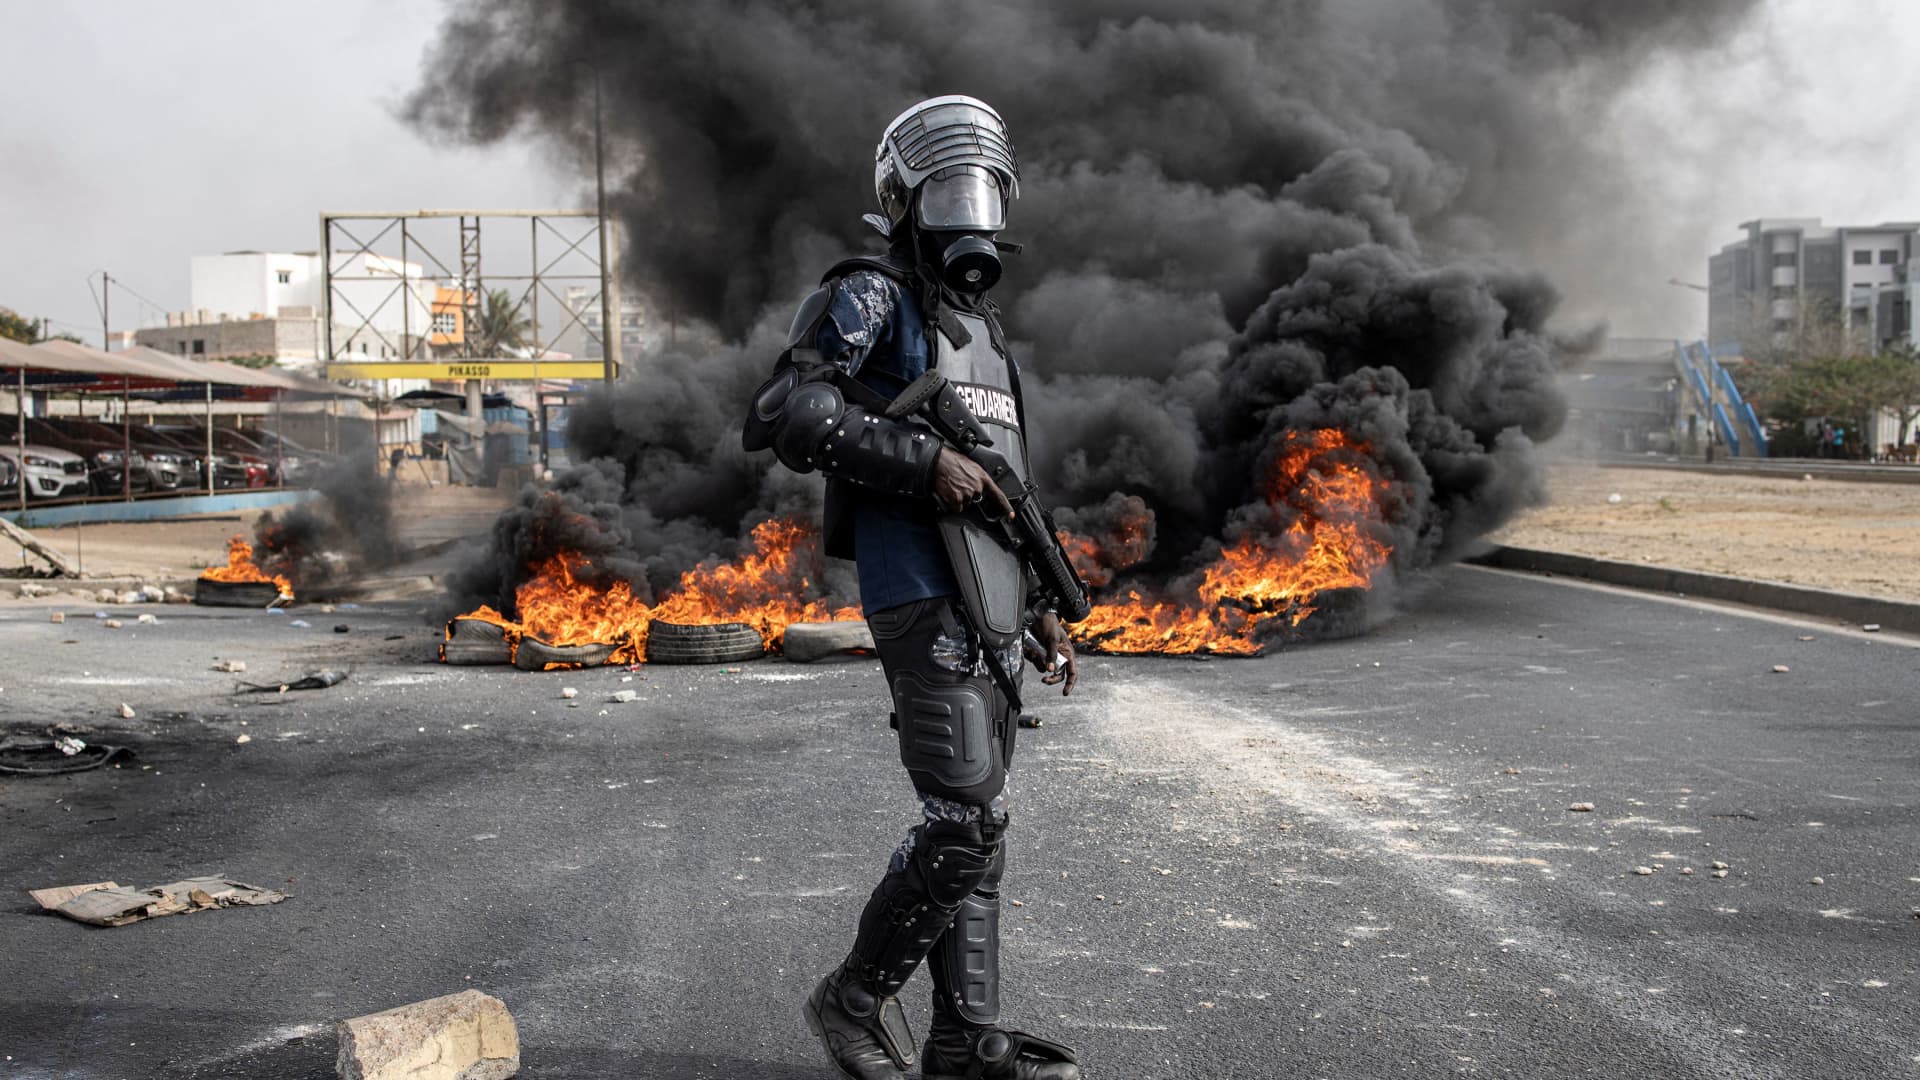 DAKAR, Senegal - May 29, 2023: A Senegalese gendarme stands near a smoke billowing from burning tyres during a protest over the arrest of opposition leader Ousmane Sonko, ahead of the final verdict in his rape trial.